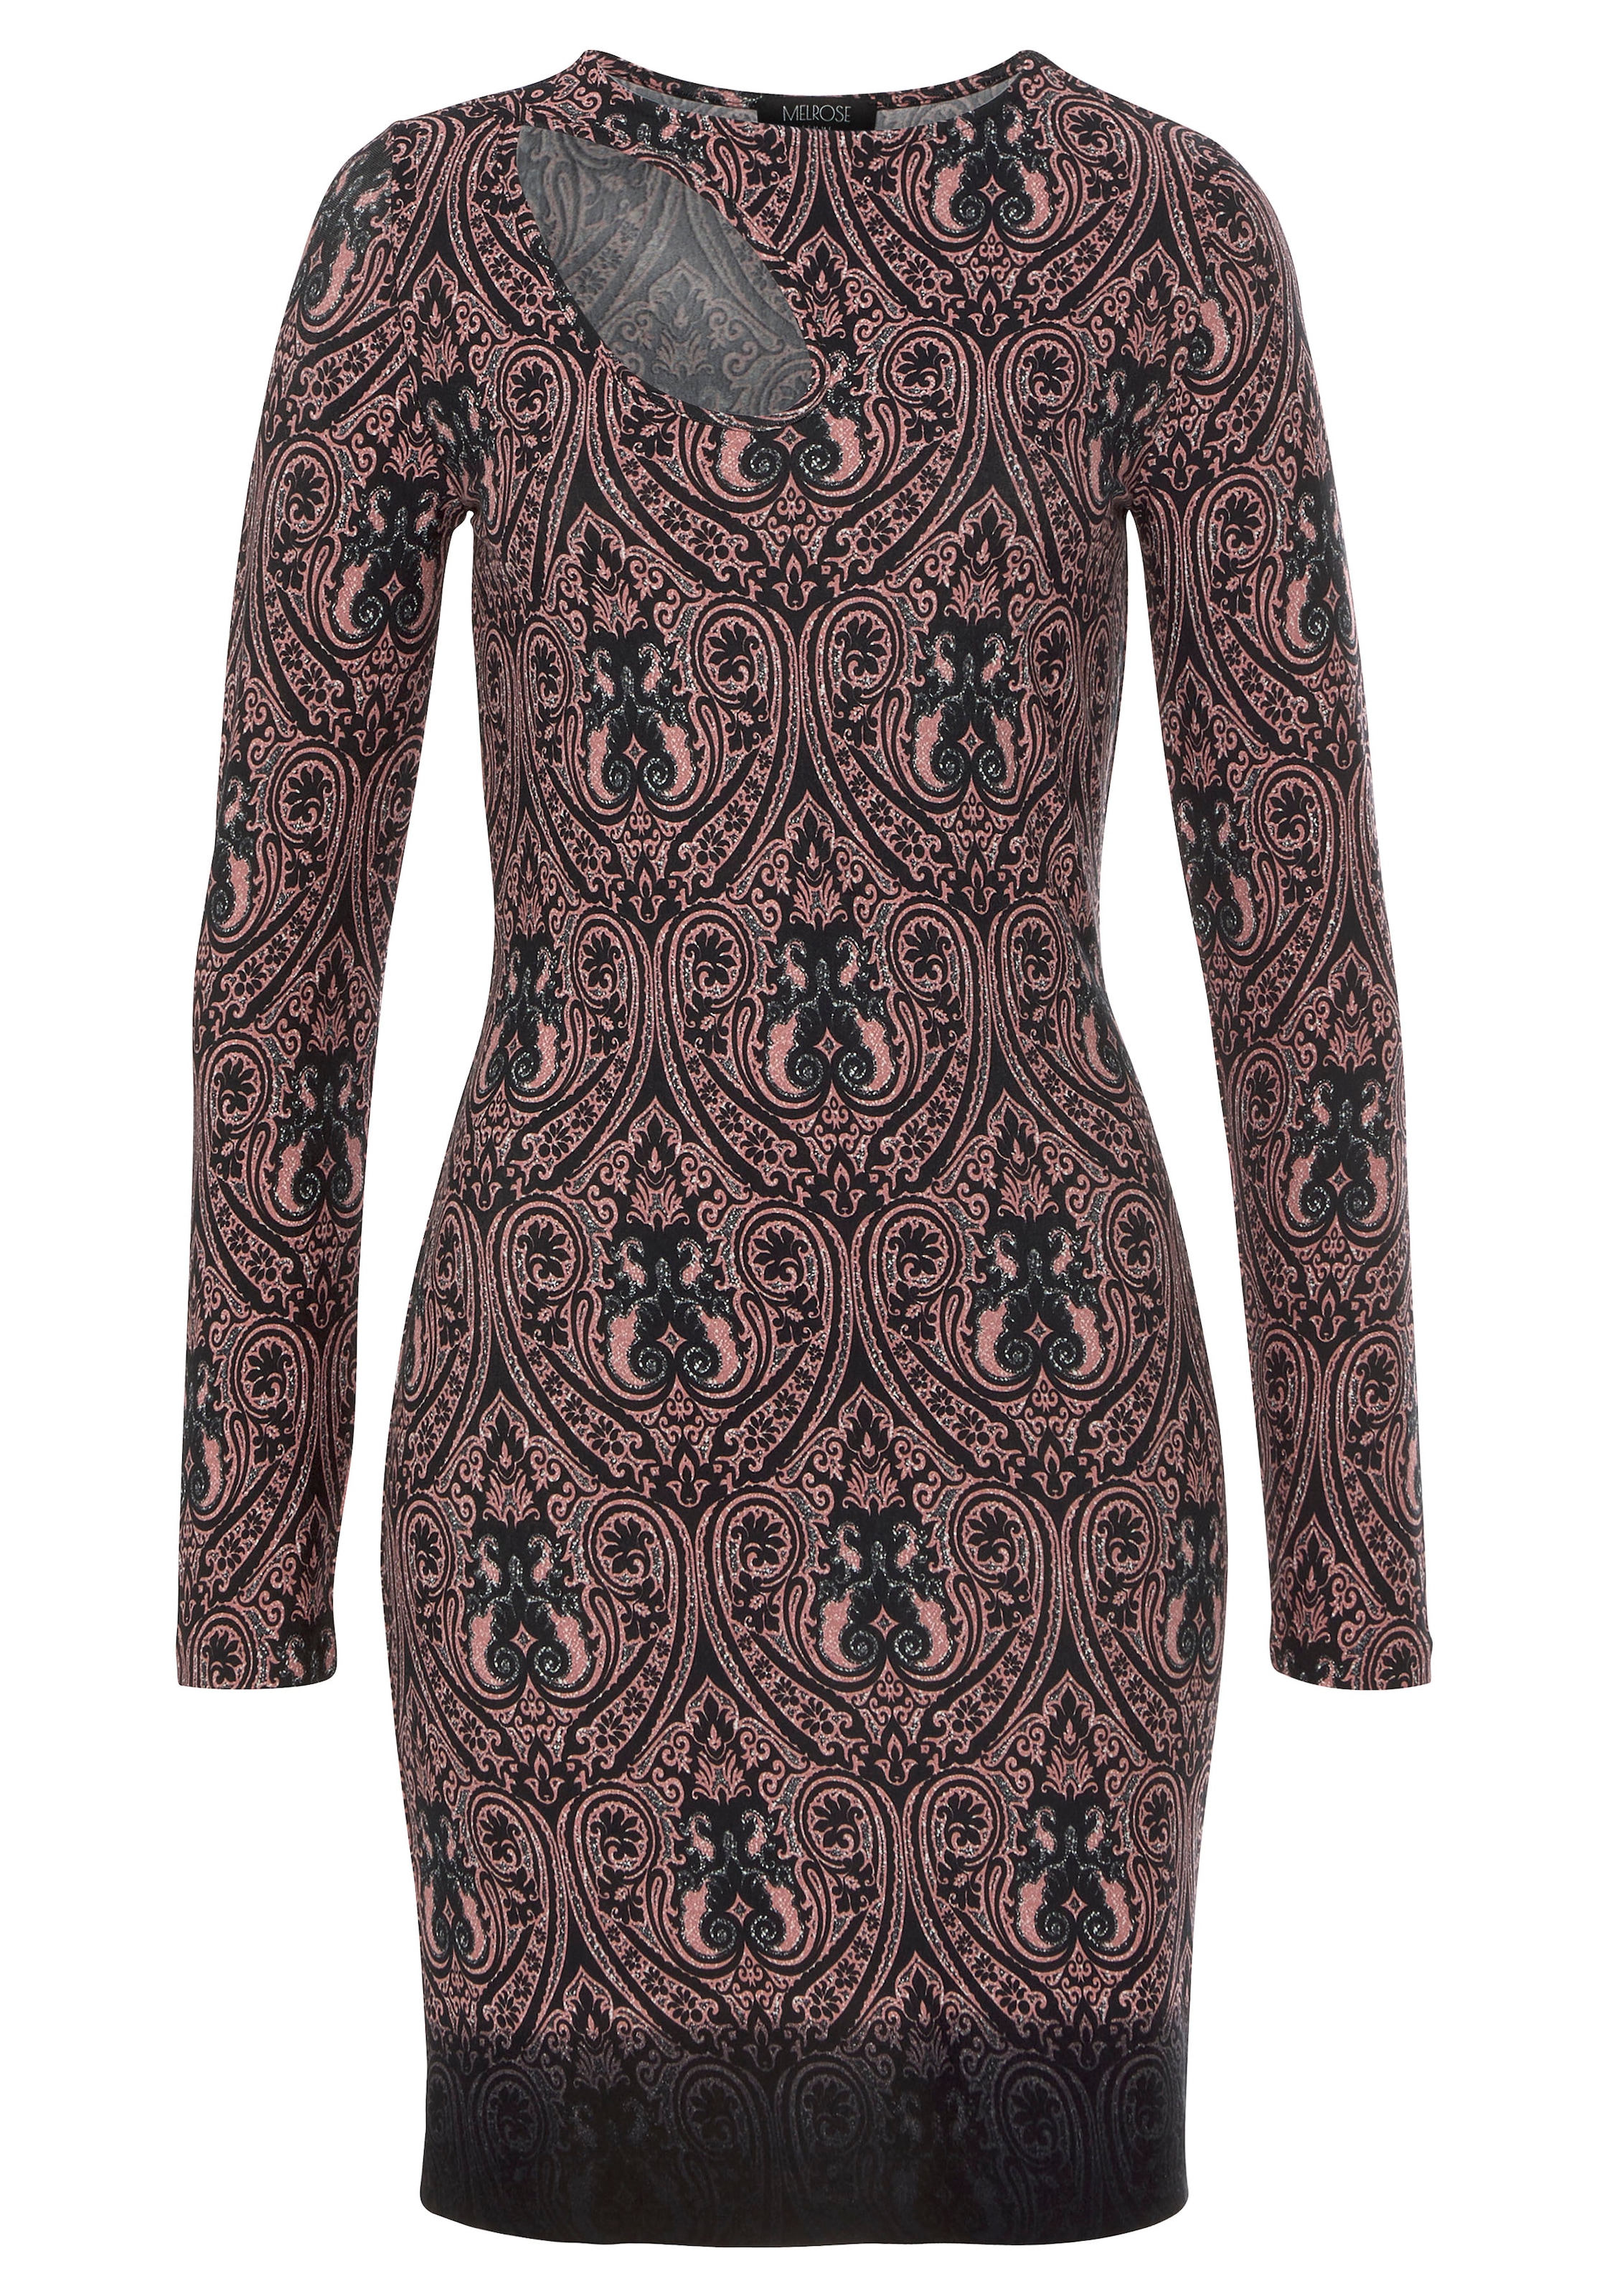 ♕ Paisley-Muster Cut-Out bei Jerseykleid, Melrose mit und